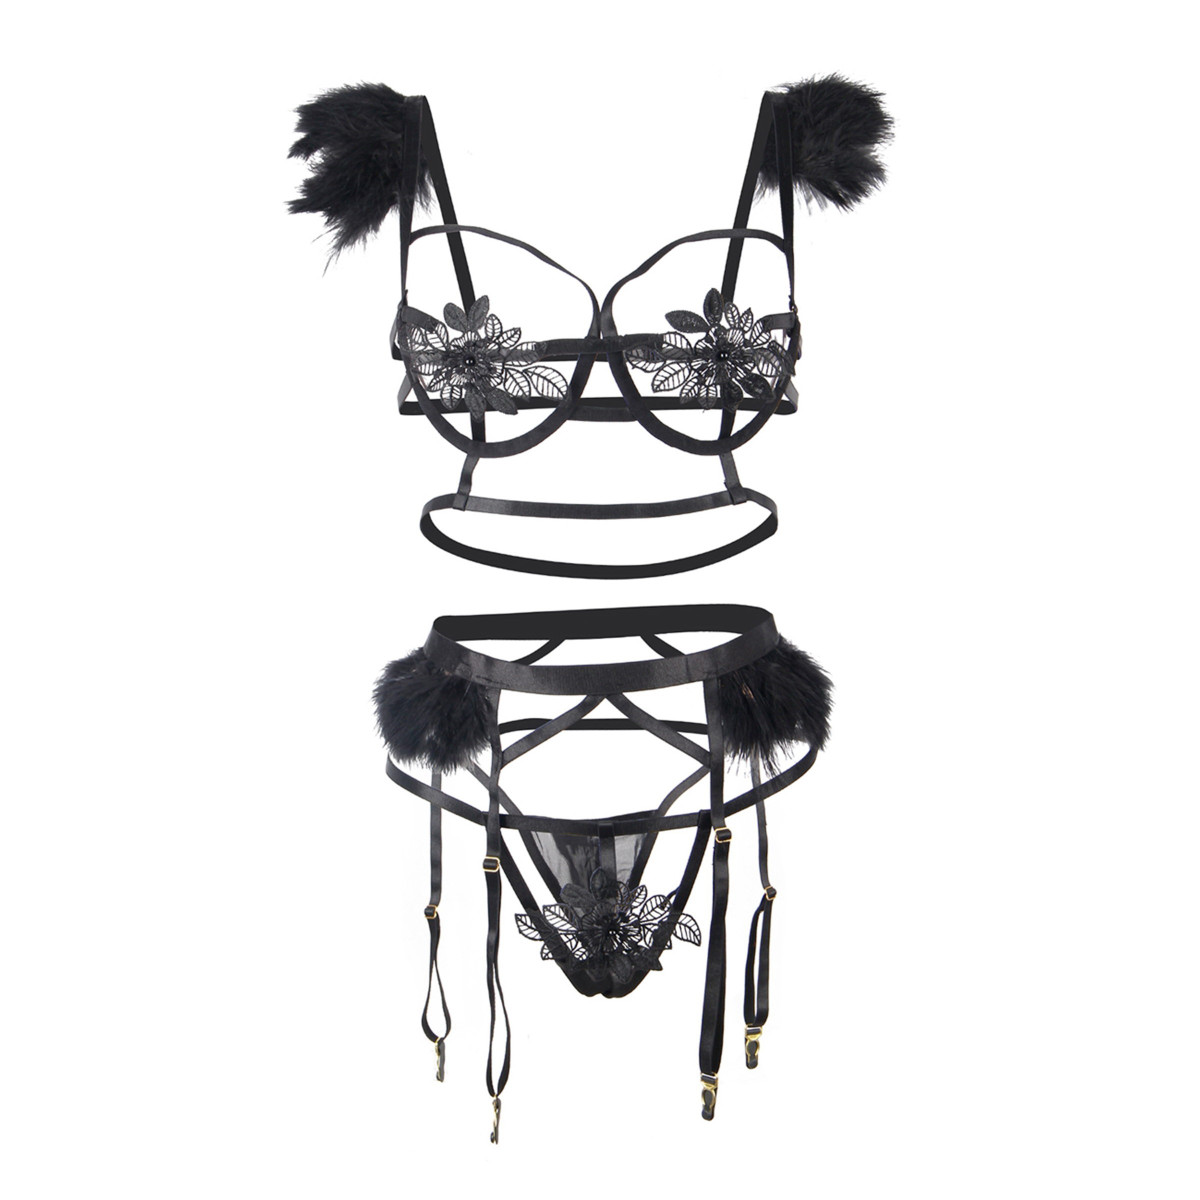 Black lingerie set with down feathers